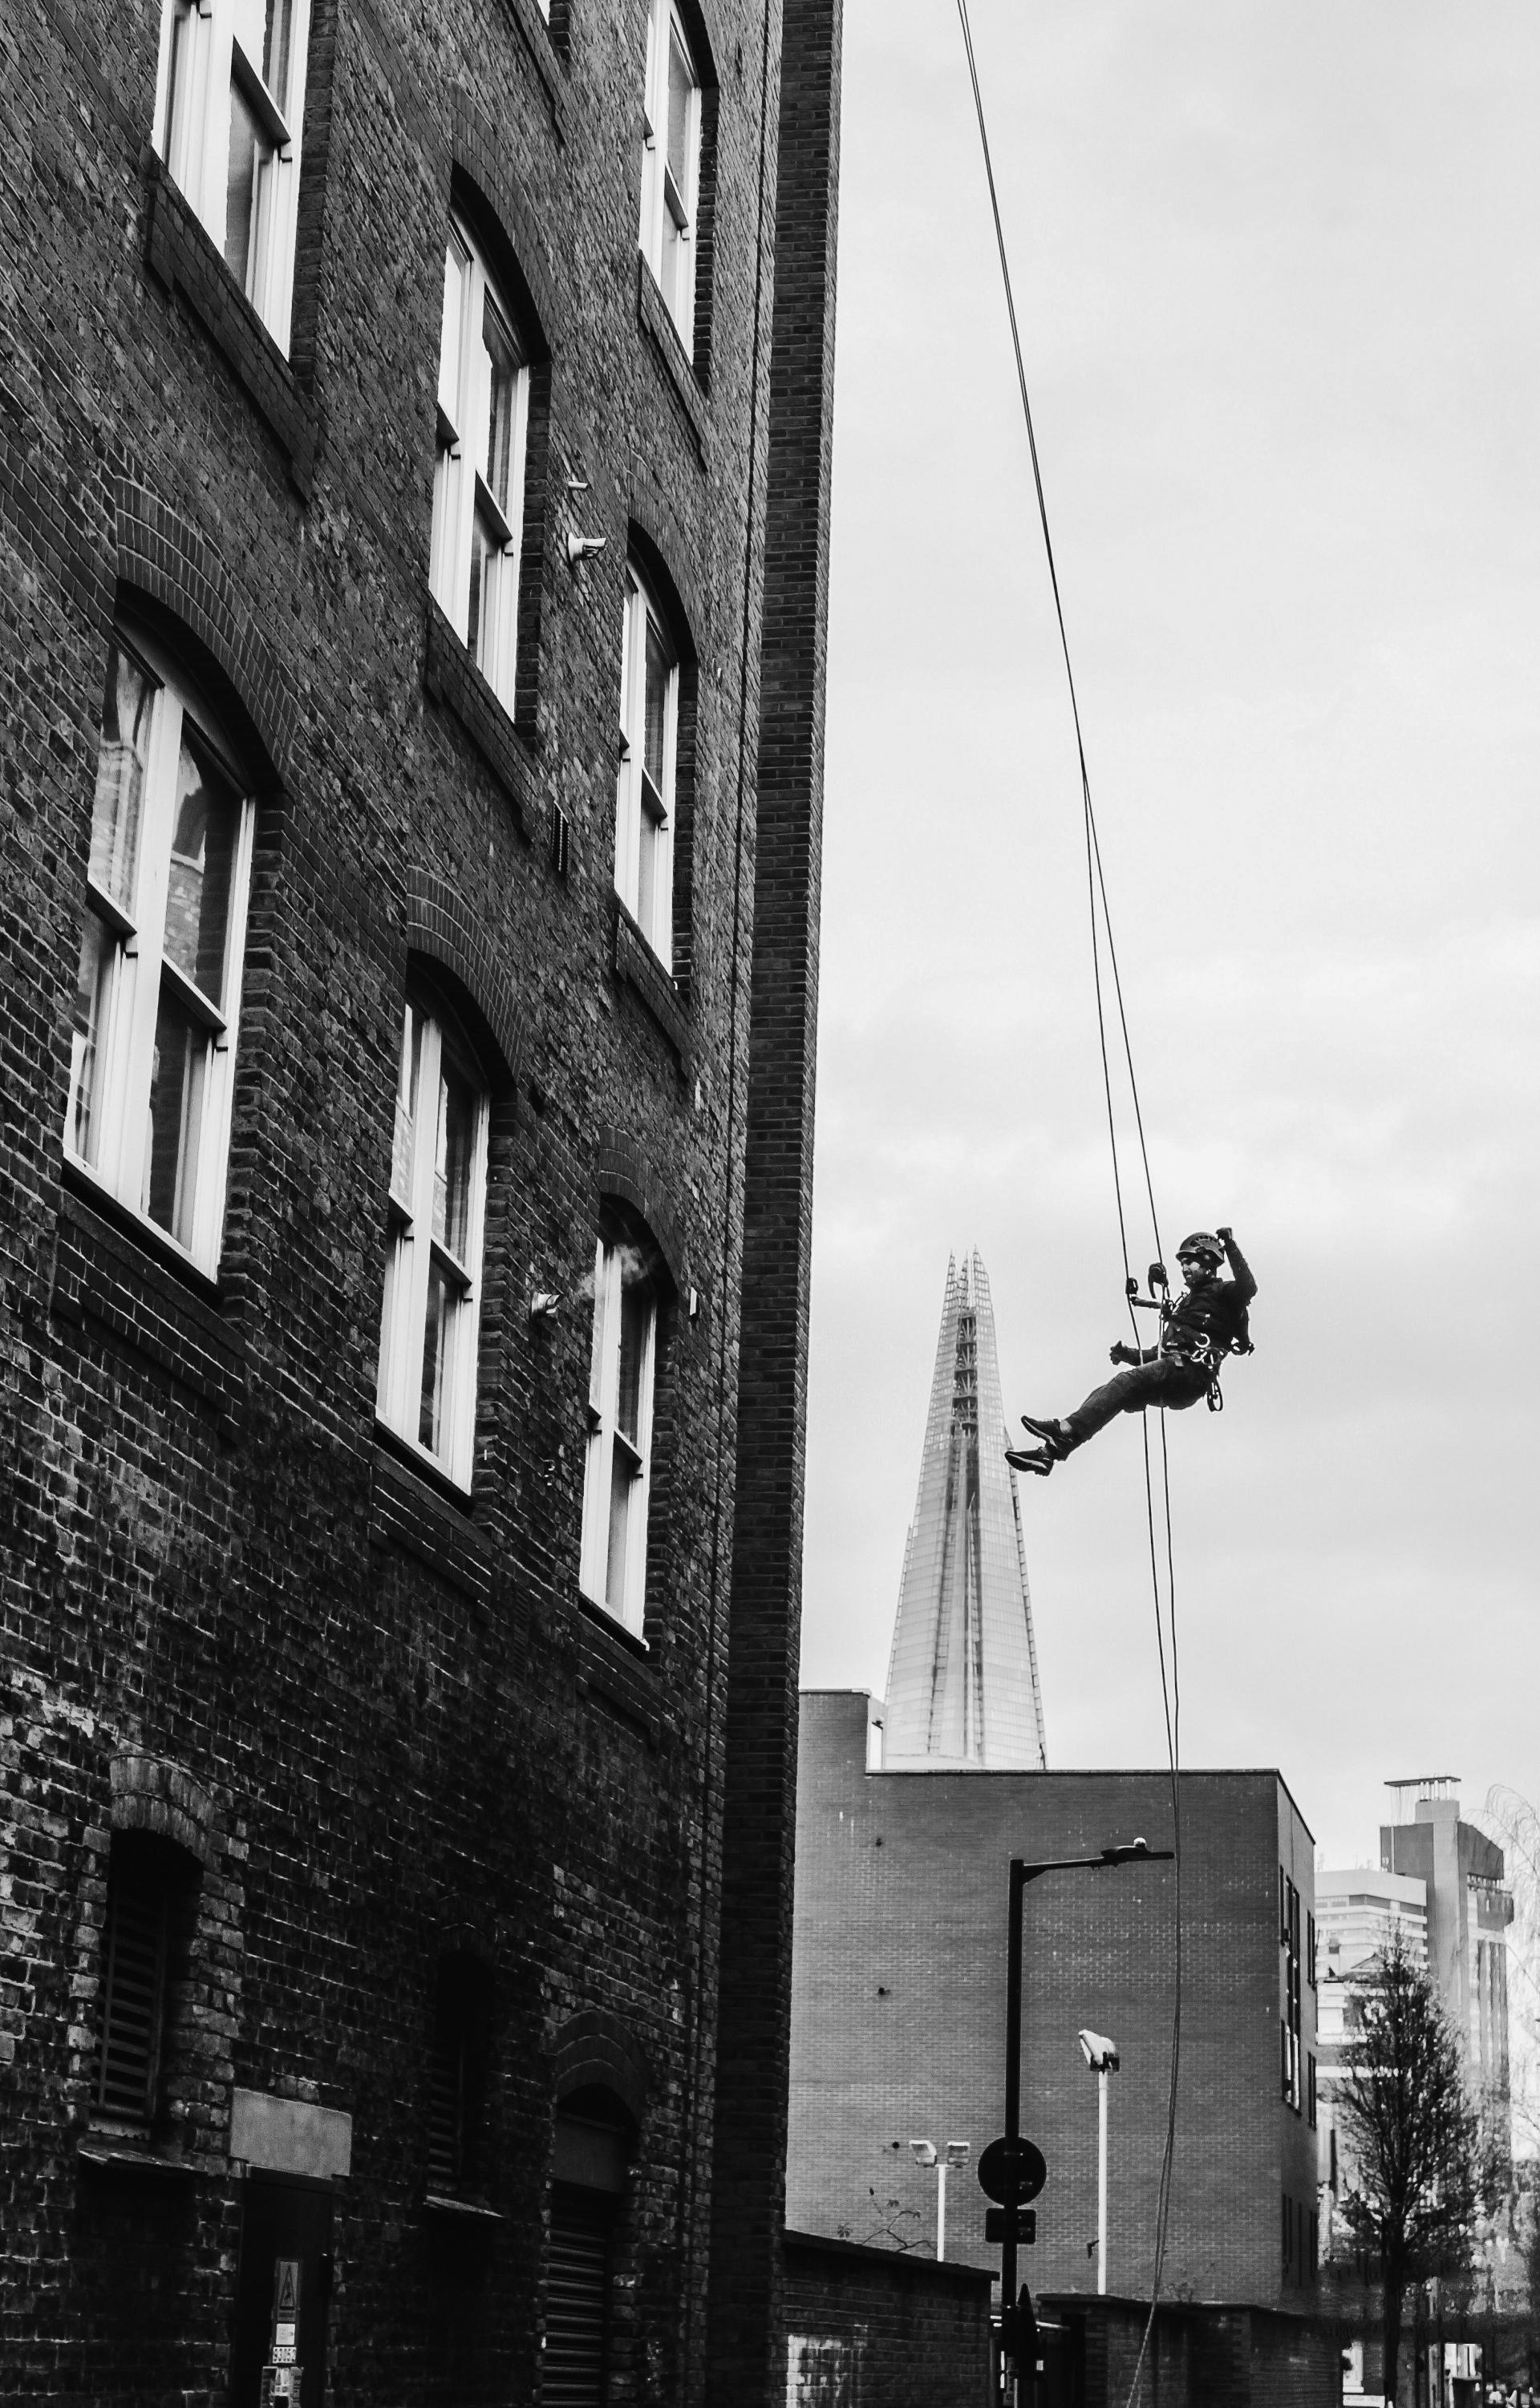 London Photography Awards Winner - Tip Toeing up the Shard